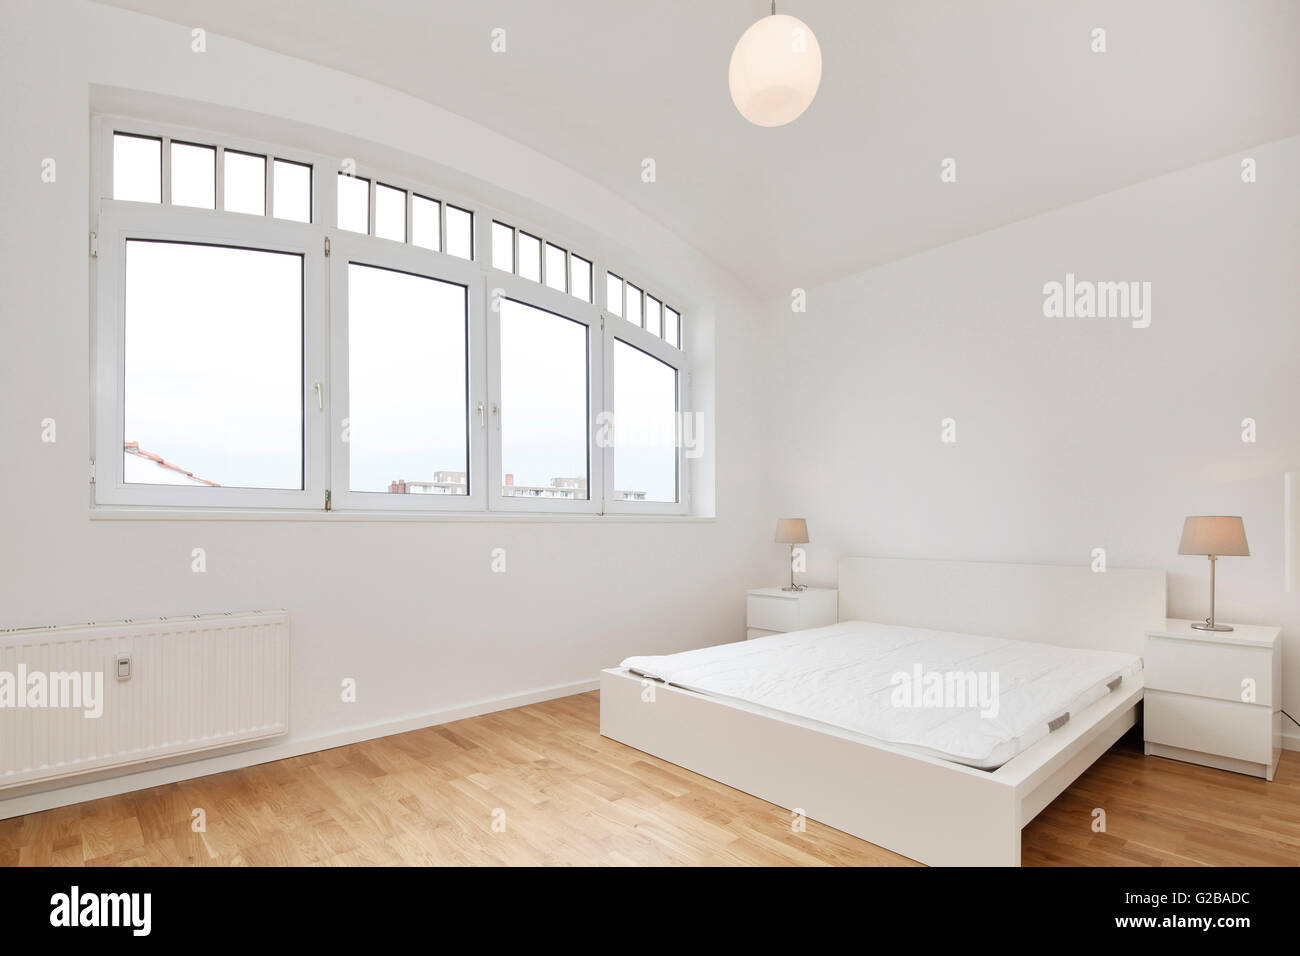 Conversion of Dach or Loft Space in Reichenberger Strasse, Kreuzberg. View of a modern bedroom with large wide windows. Contemporary furniture and minimal decoration. White walls and wood floors. Stock Photo